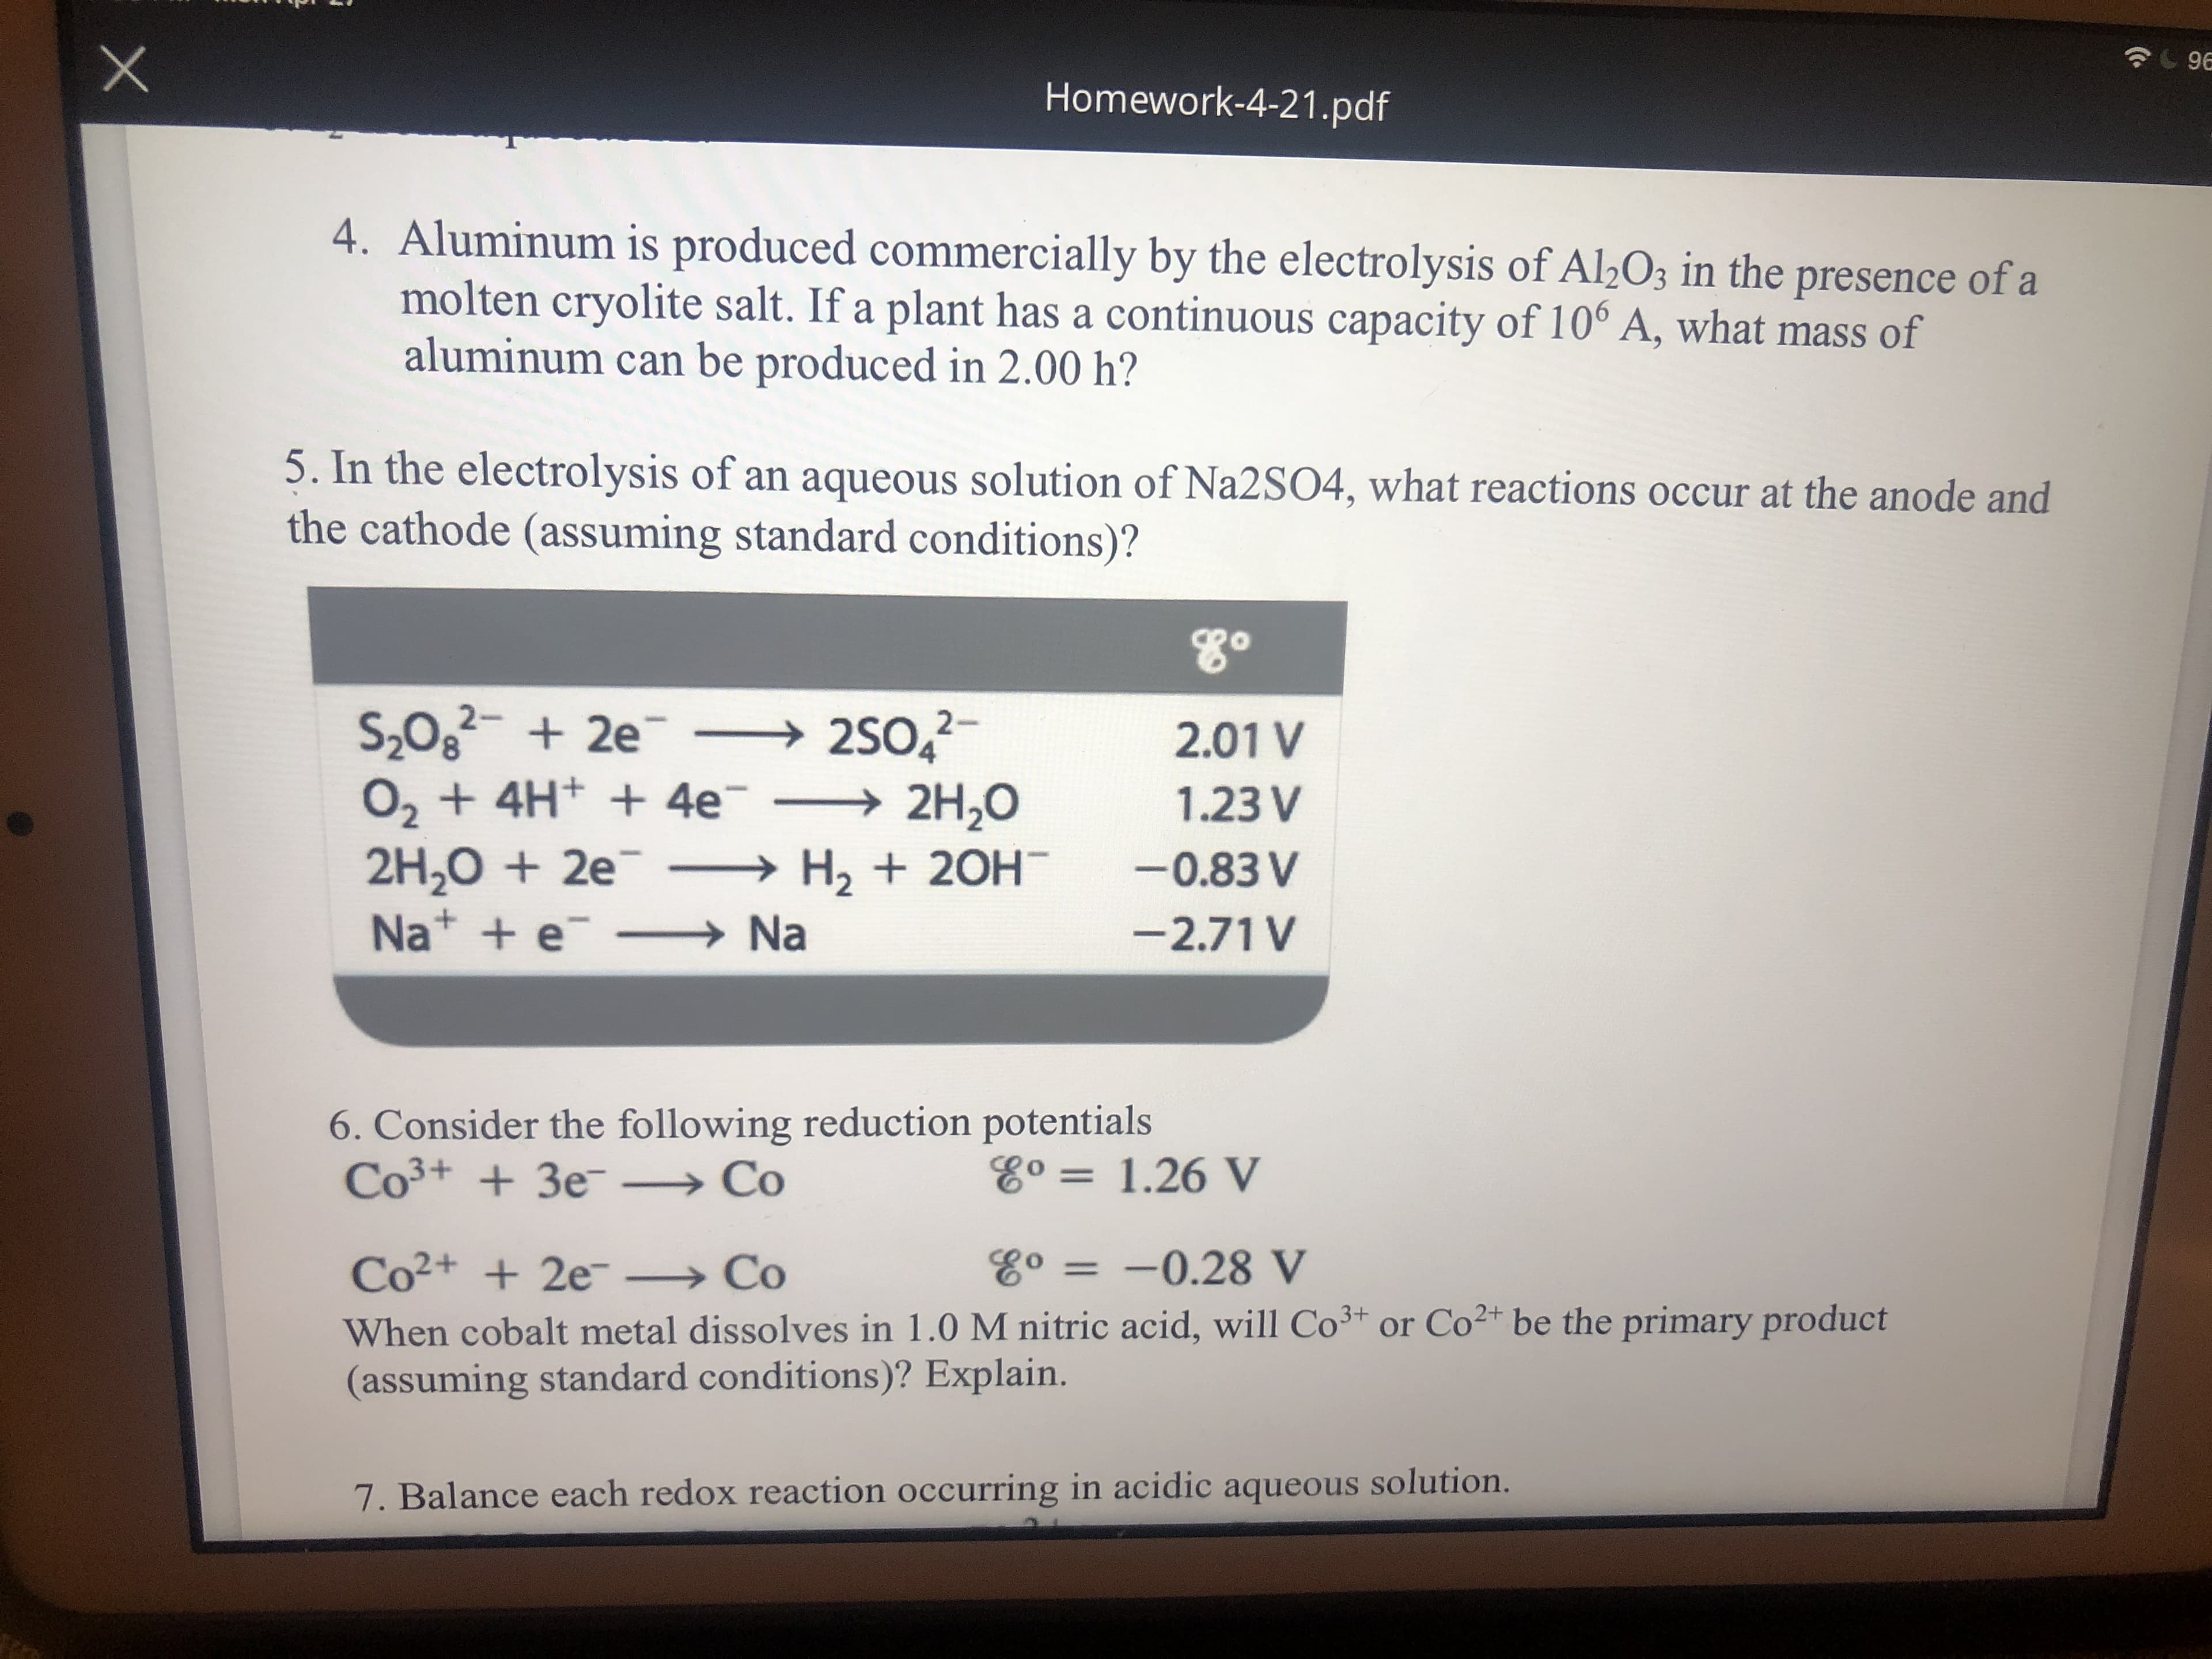 96
Homework-4-21.pdf
4. Aluminum is produced commercially by the electrolysis of Al½O3 in the presence of a
molten cryolite salt. If a plant has a continuous capacity of 10° A, what mass of
aluminum can be produced in 2.00 h?
5. In the electrolysis of an aqueous solution of Na2S04, what reactions occur at the anode and
the cathode (assuming standard conditions)?
80
S,02- + 2e → 2SO,
→2S0,
O, + 4H+ + 4e¯ → 2H,0
2H,0 + 2e¯ → H, + 20H
→ Na
2.01 V
1.23 V
-0.83 V
Nat + e
-2.71 V
6. Consider the following reduction potentials
Co3+ + 3e¯ → Co
Eo = 1.26 V
%3D
E° = -0.28 V
Co²+ + 2e¯ → Co
When cobalt metal dissolves in 1.0 M nitric acid, will Co³* or Co²+ be the primary product
(assuming standard conditions)? Explain.
7. Balance each redox reaction occurring in acidic aqueous solution.
